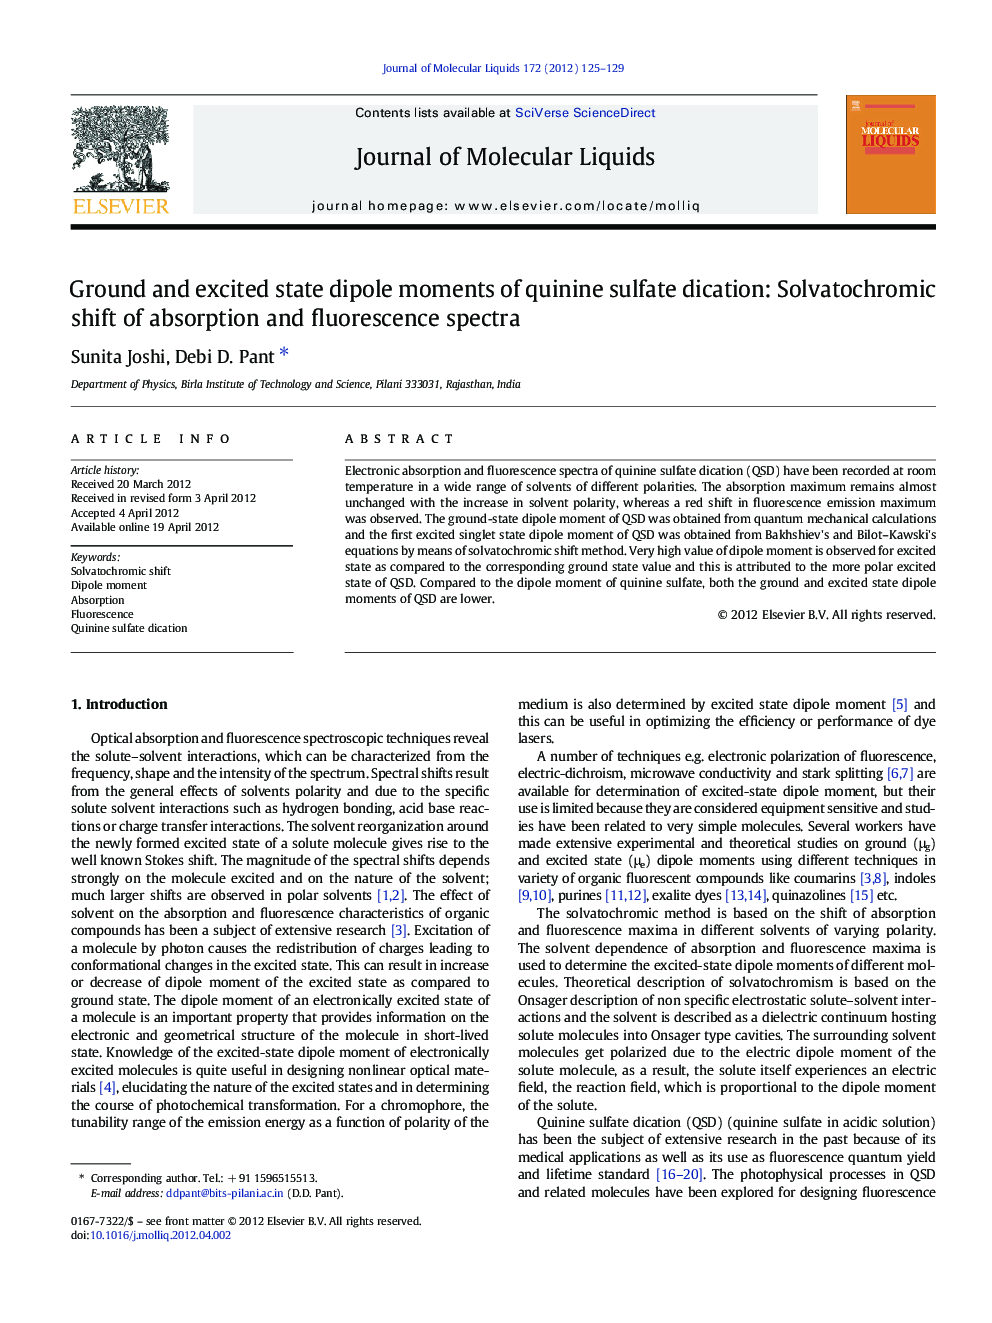 Ground and excited state dipole moments of quinine sulfate dication: Solvatochromic shift of absorption and fluorescence spectra